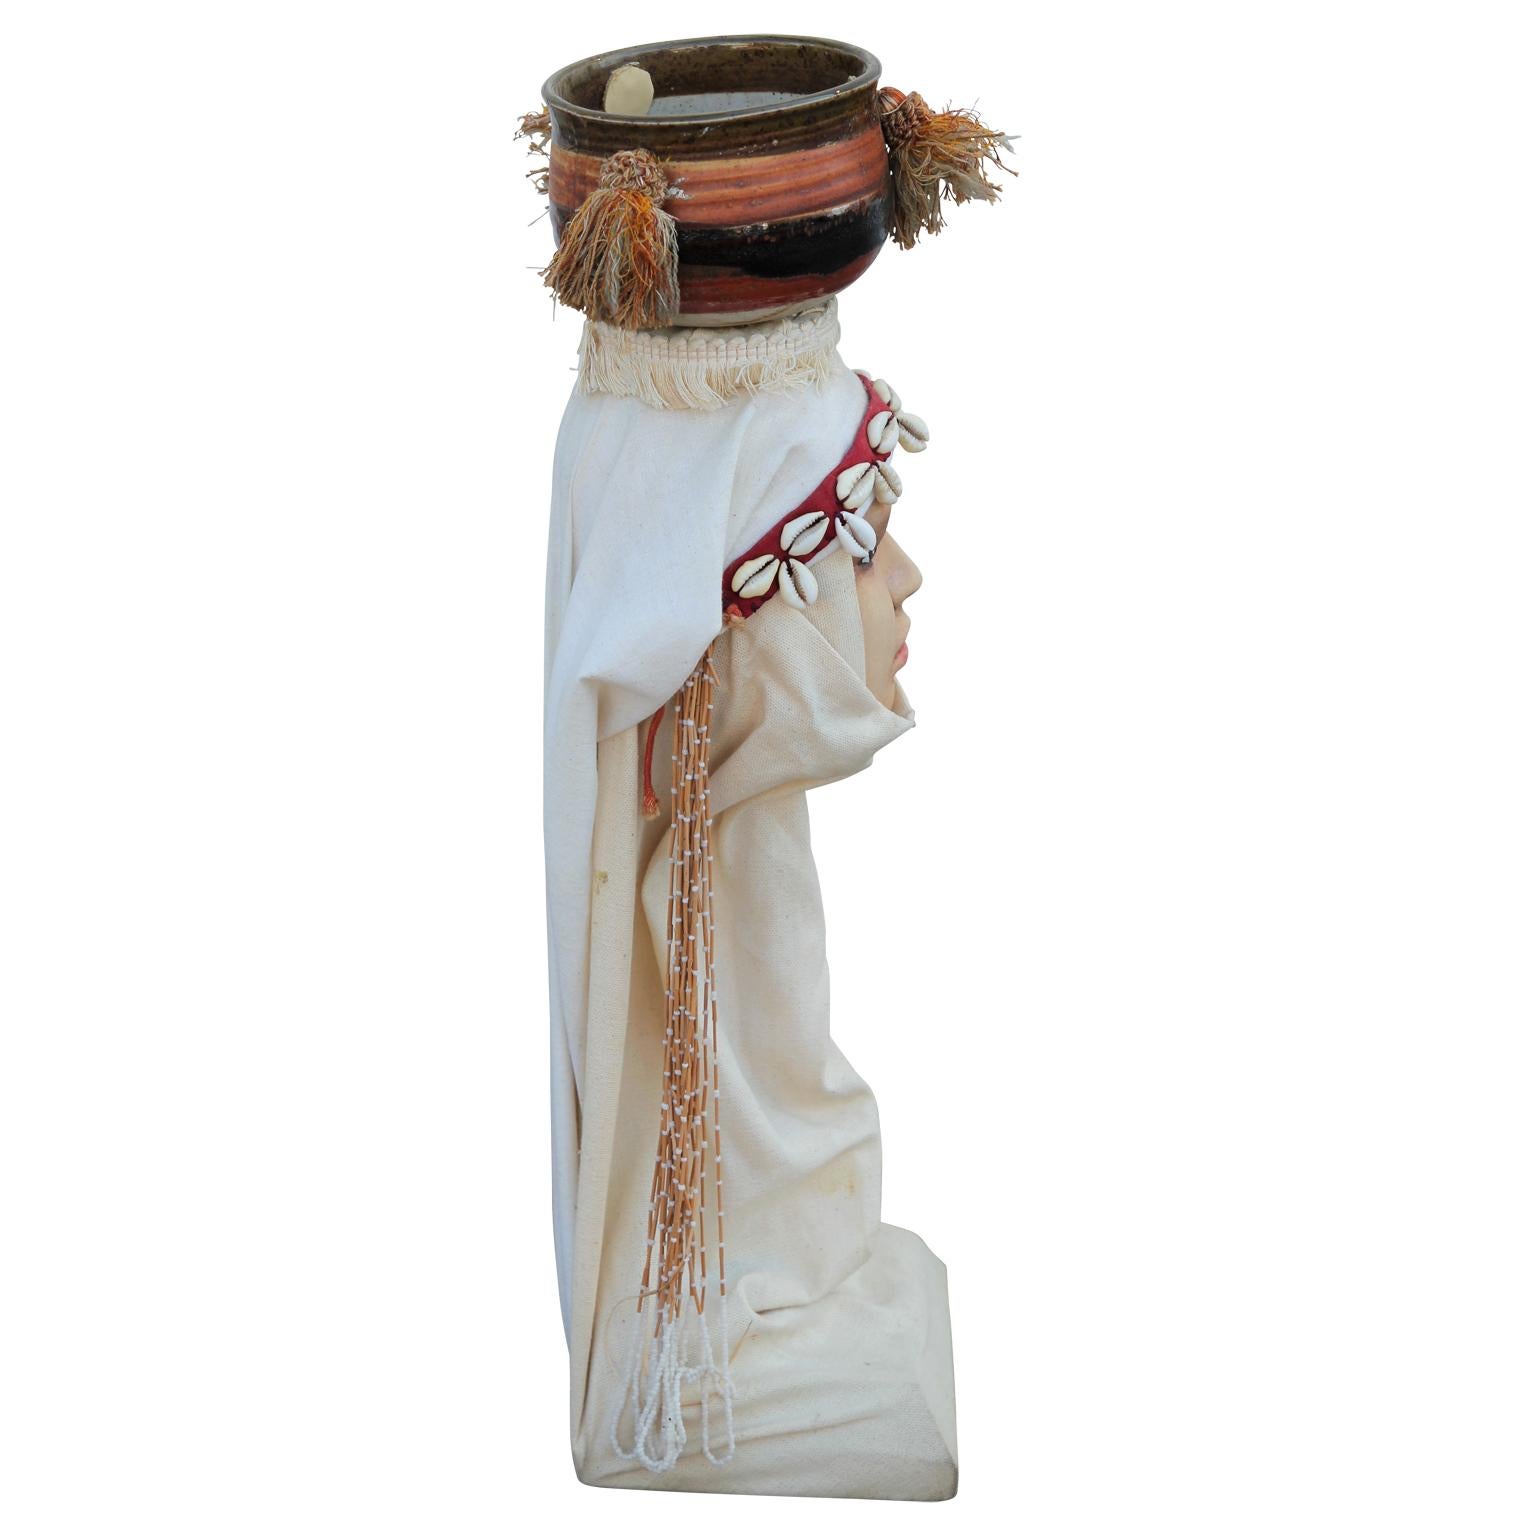 Mixed Media Sculpture of Female with Ceramic Pot on Head  3